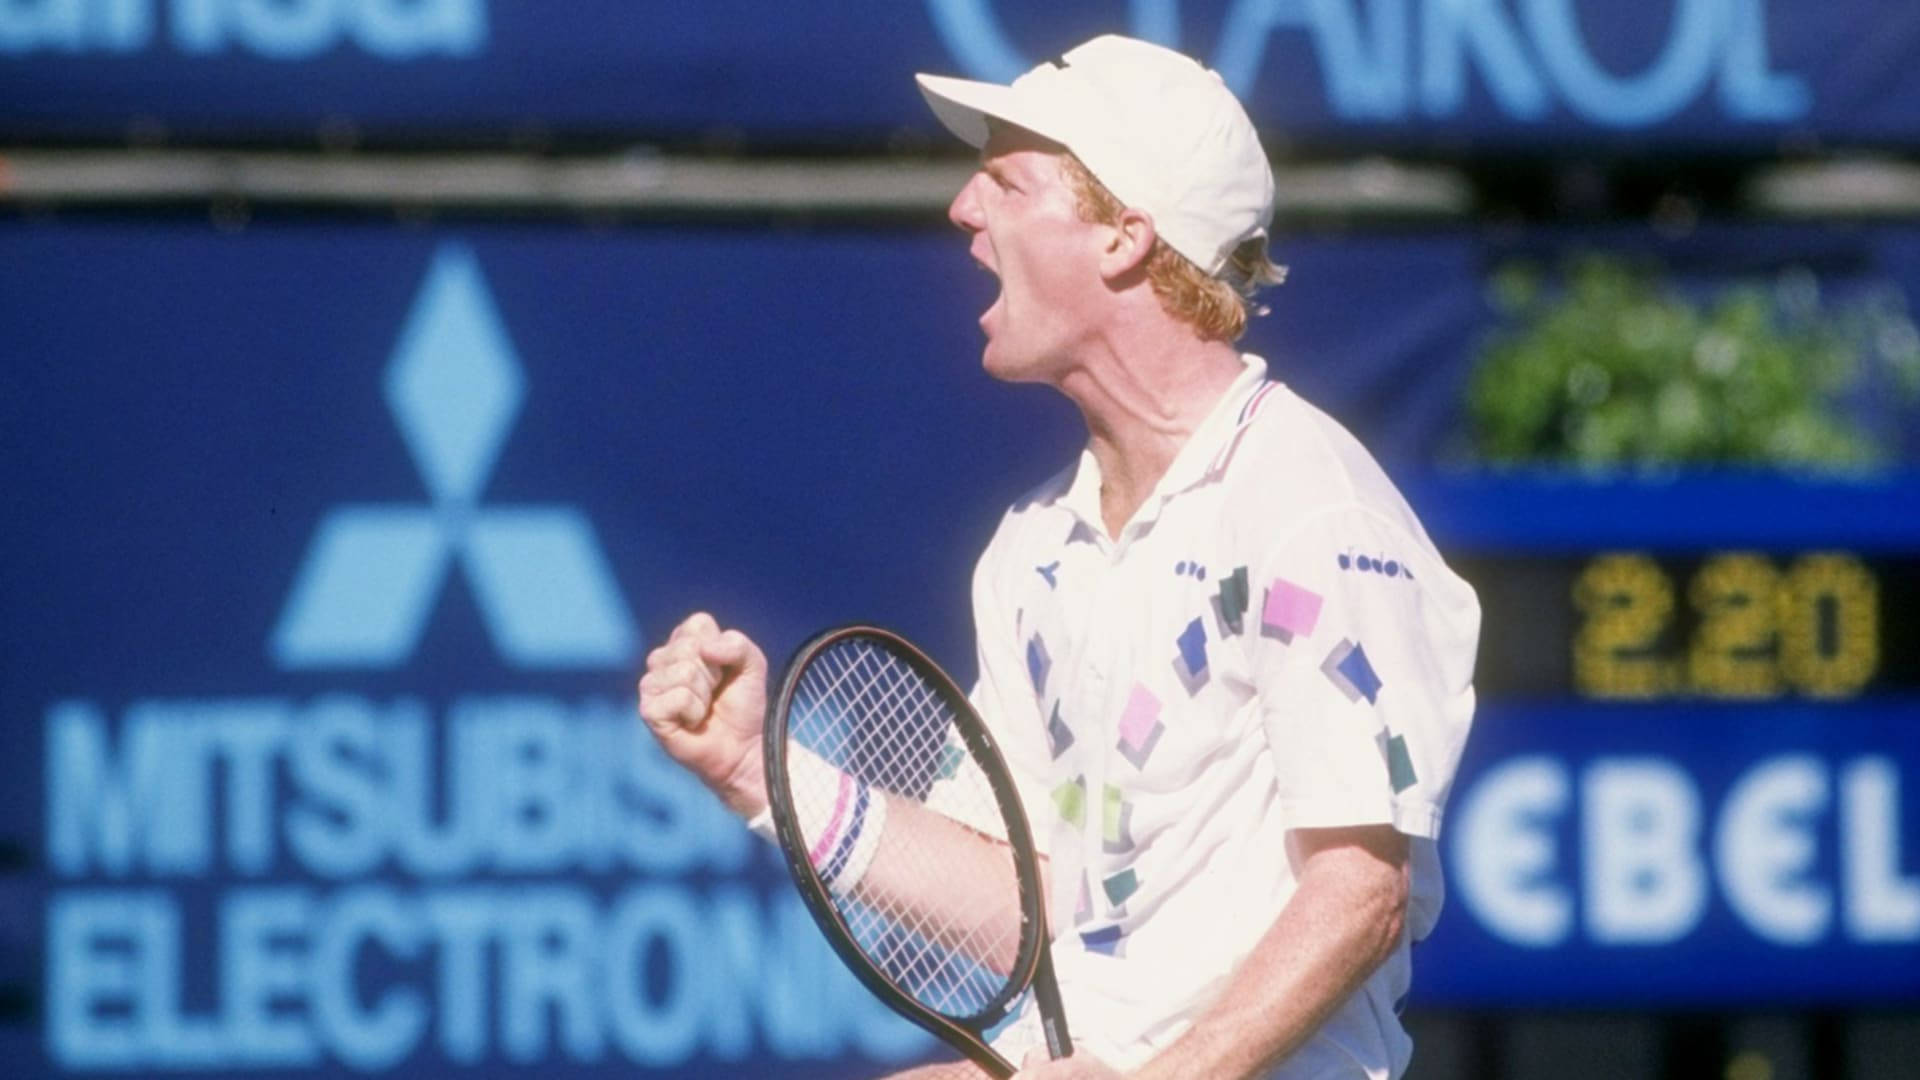 Jimcourier Besegrar Andre Agassi. (this Sentence Could Be Used As A Title Or Description For A Wallpaper Featuring The Two Tennis Players In Action.) Wallpaper